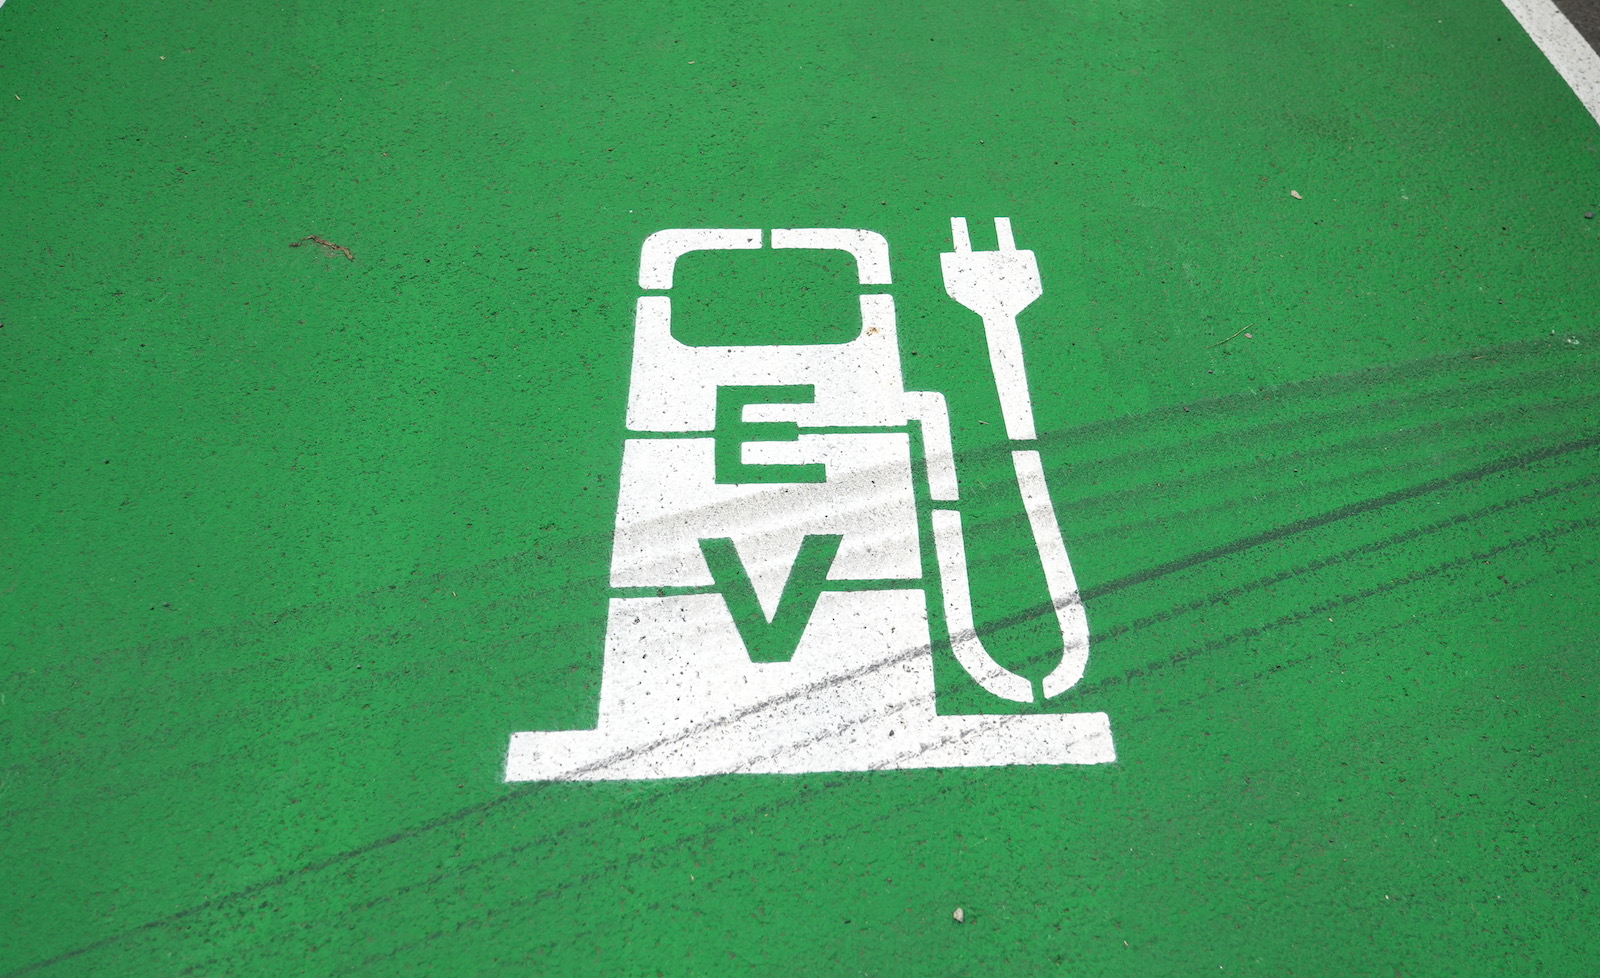 FCAI welcomes new government incentives for electric vehicles